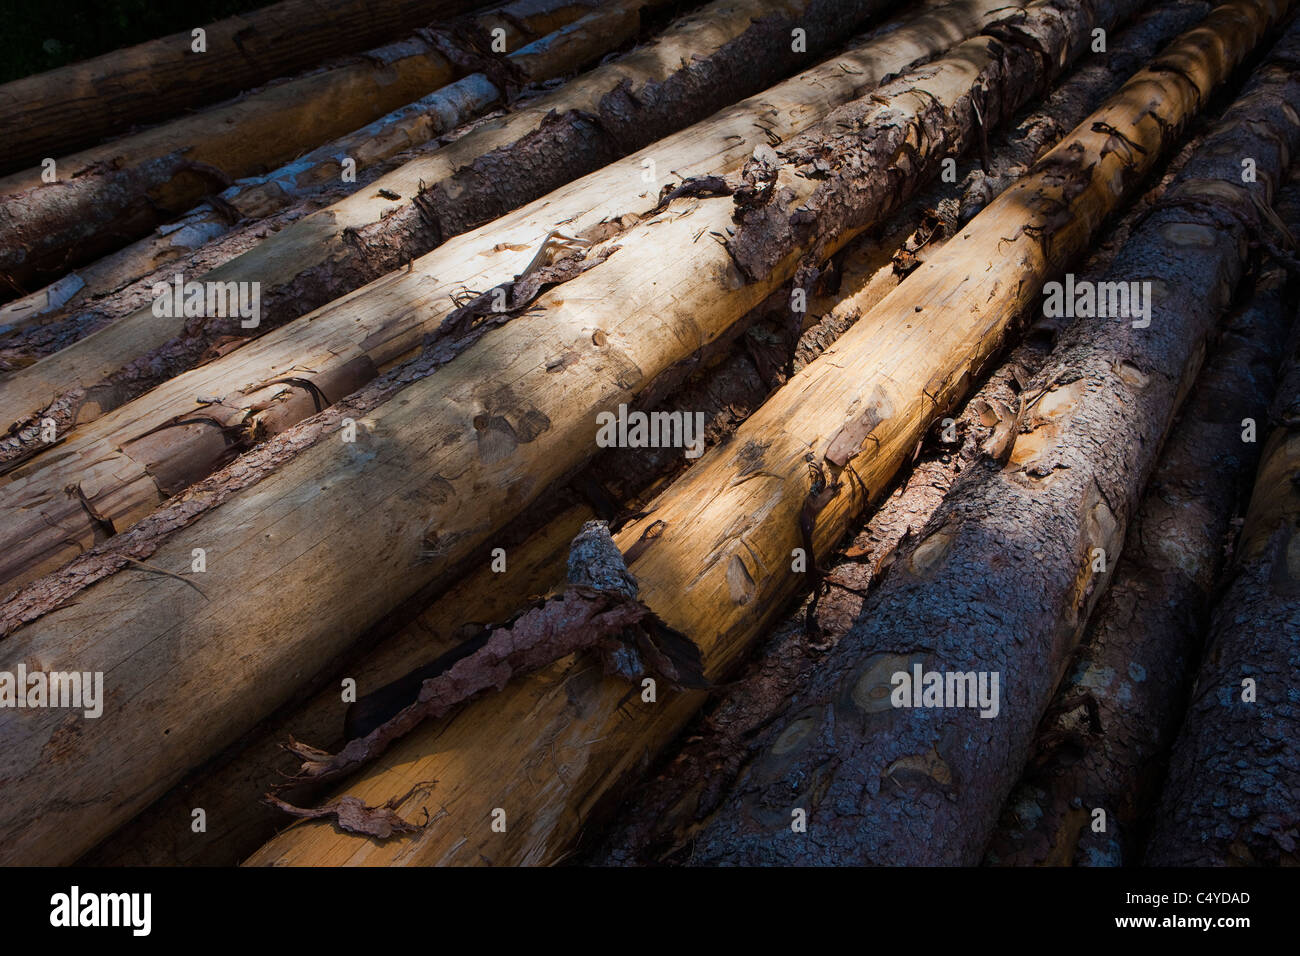 Old wood stacked together with a small shine of warmth Stock Photo